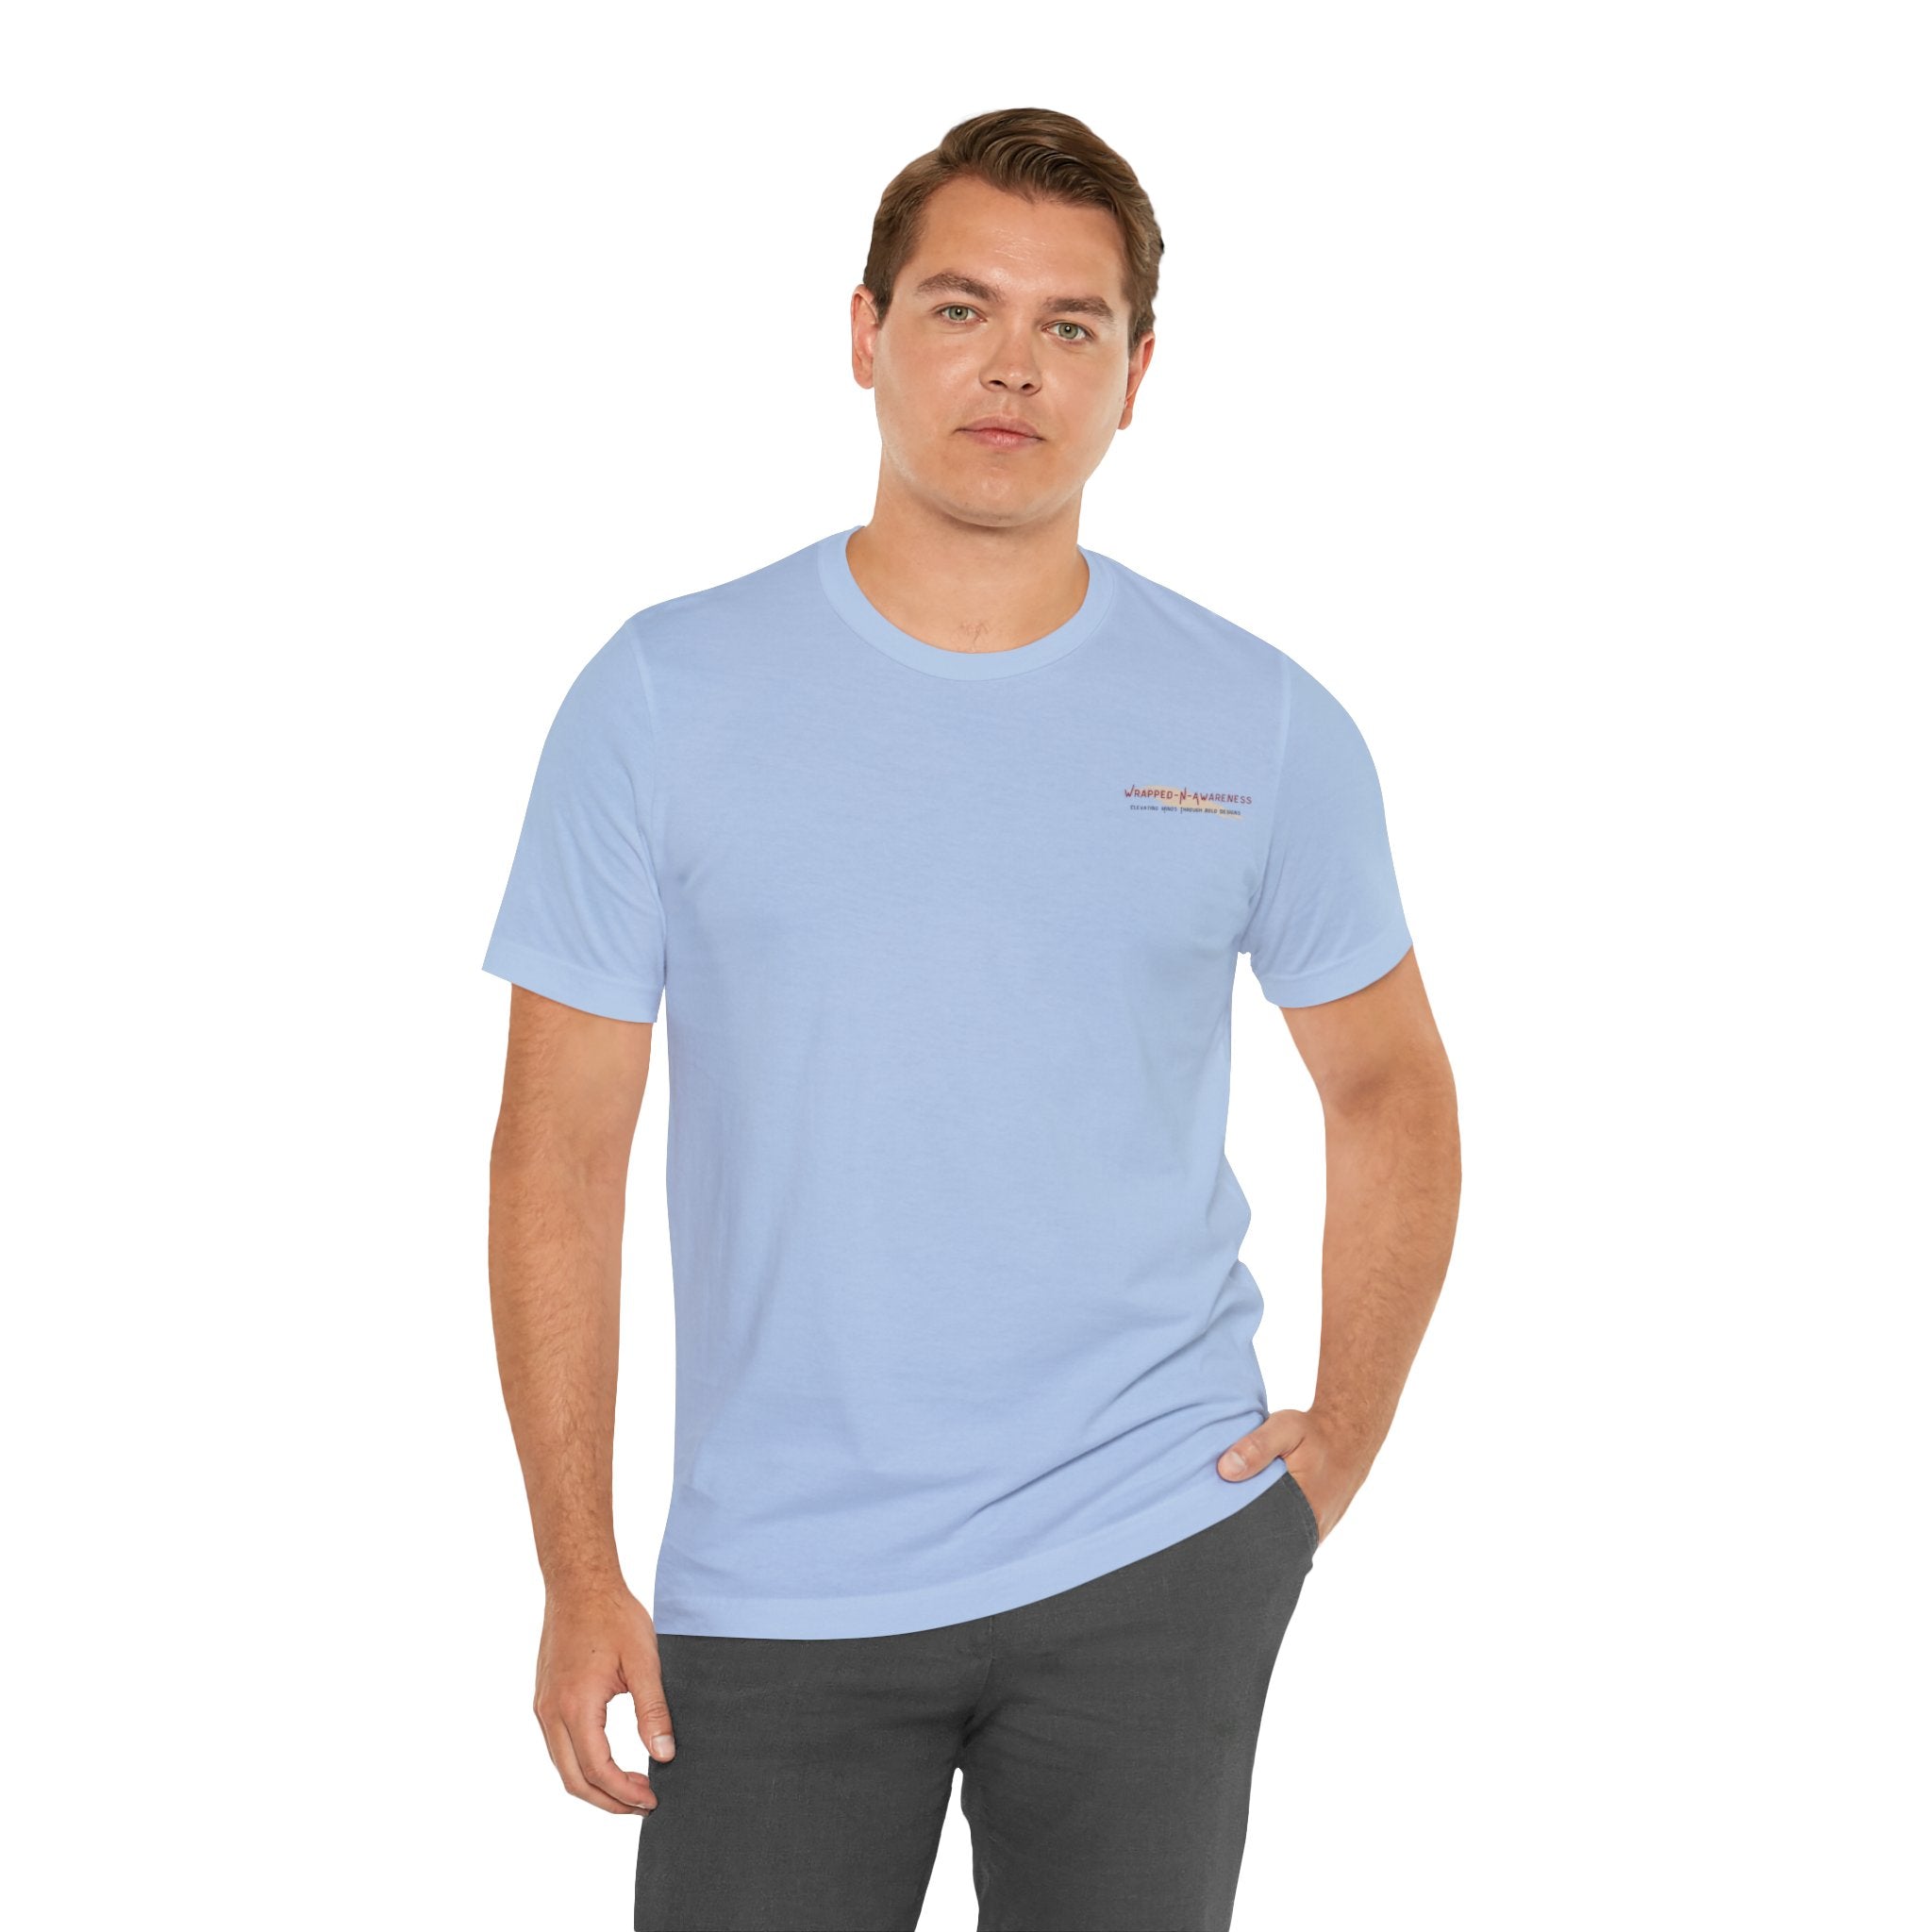 Hope Conquers Fear Jersey Tee - Bella+Canvas 3001 Heather Ice Blue Airlume Cotton Bella+Canvas 3001 Crew Neckline Jersey Short Sleeve Lightweight Fabric Mental Health Support Retail Fit Tear-away Label Tee Unisex Tee T-Shirt 4049329738239197311_2048 Printify